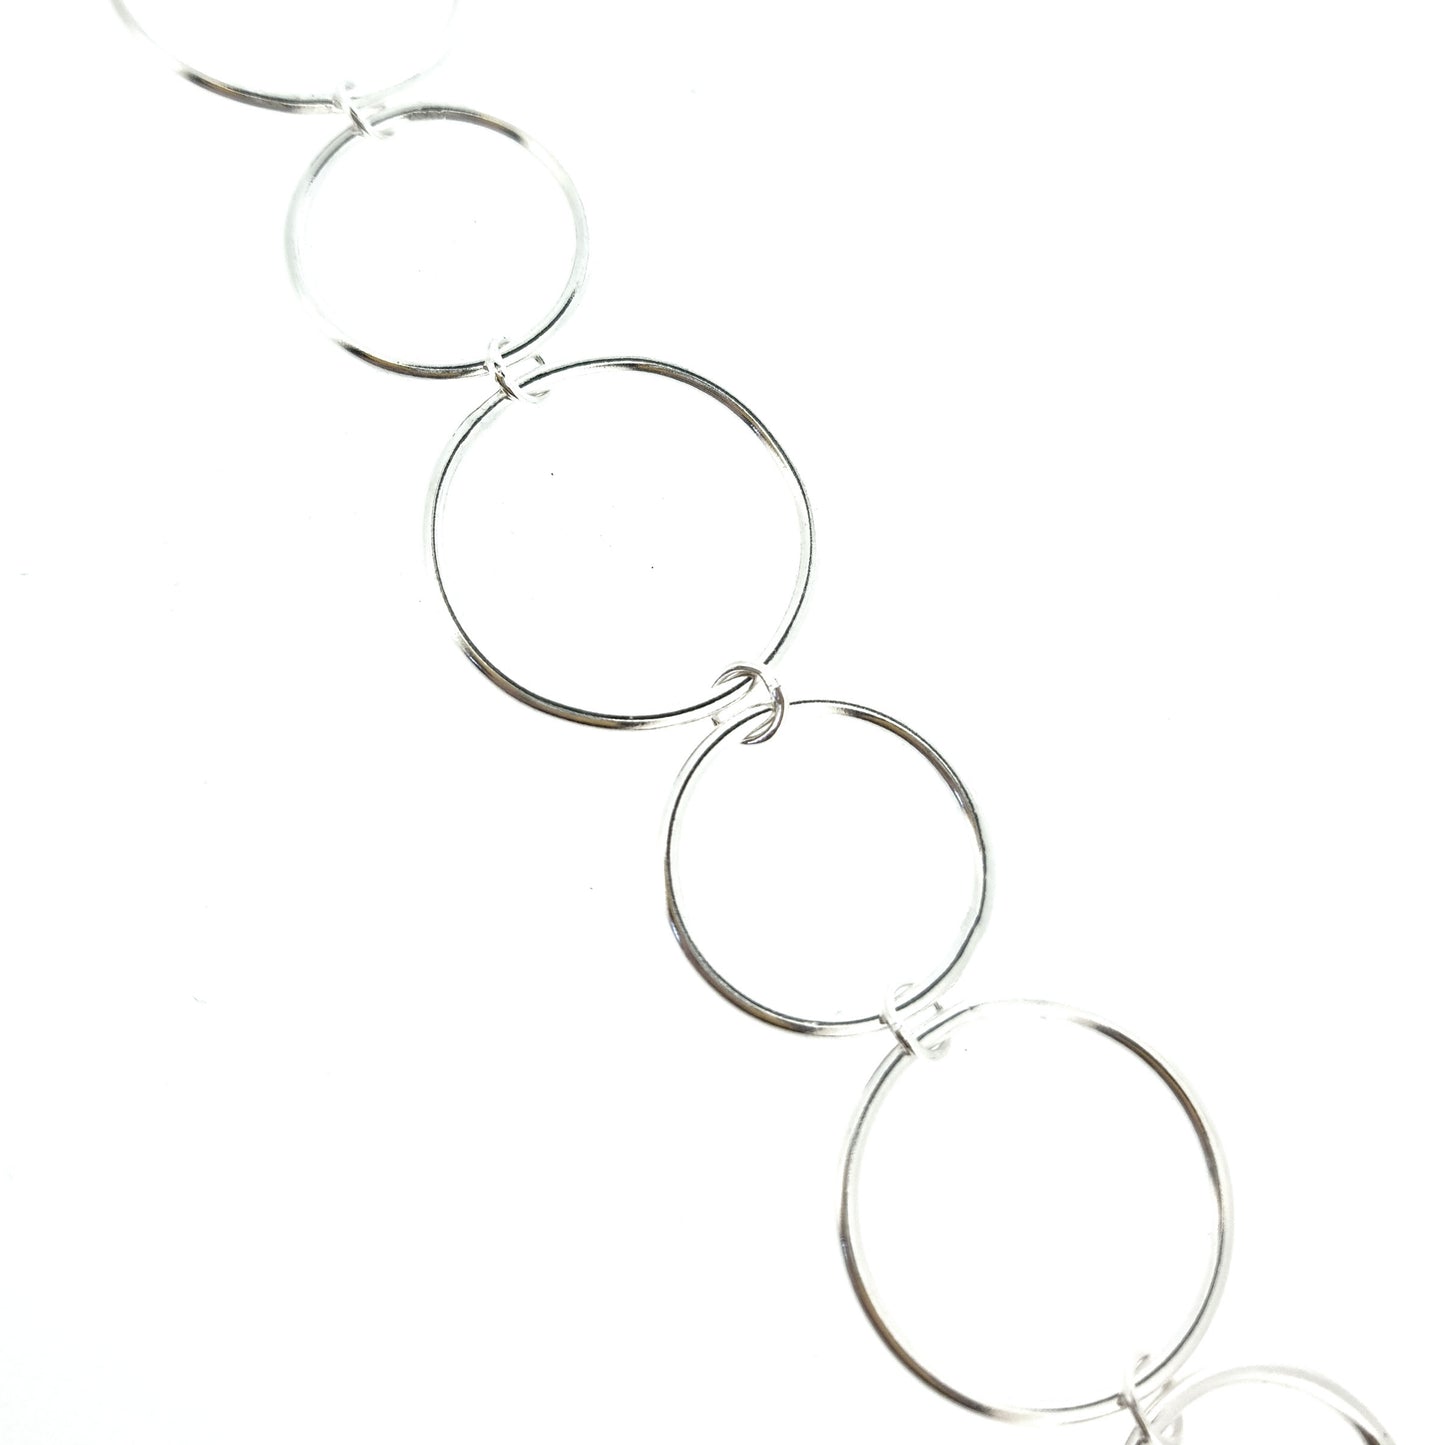 Silver chain link bracelet with circle links of different sizes.